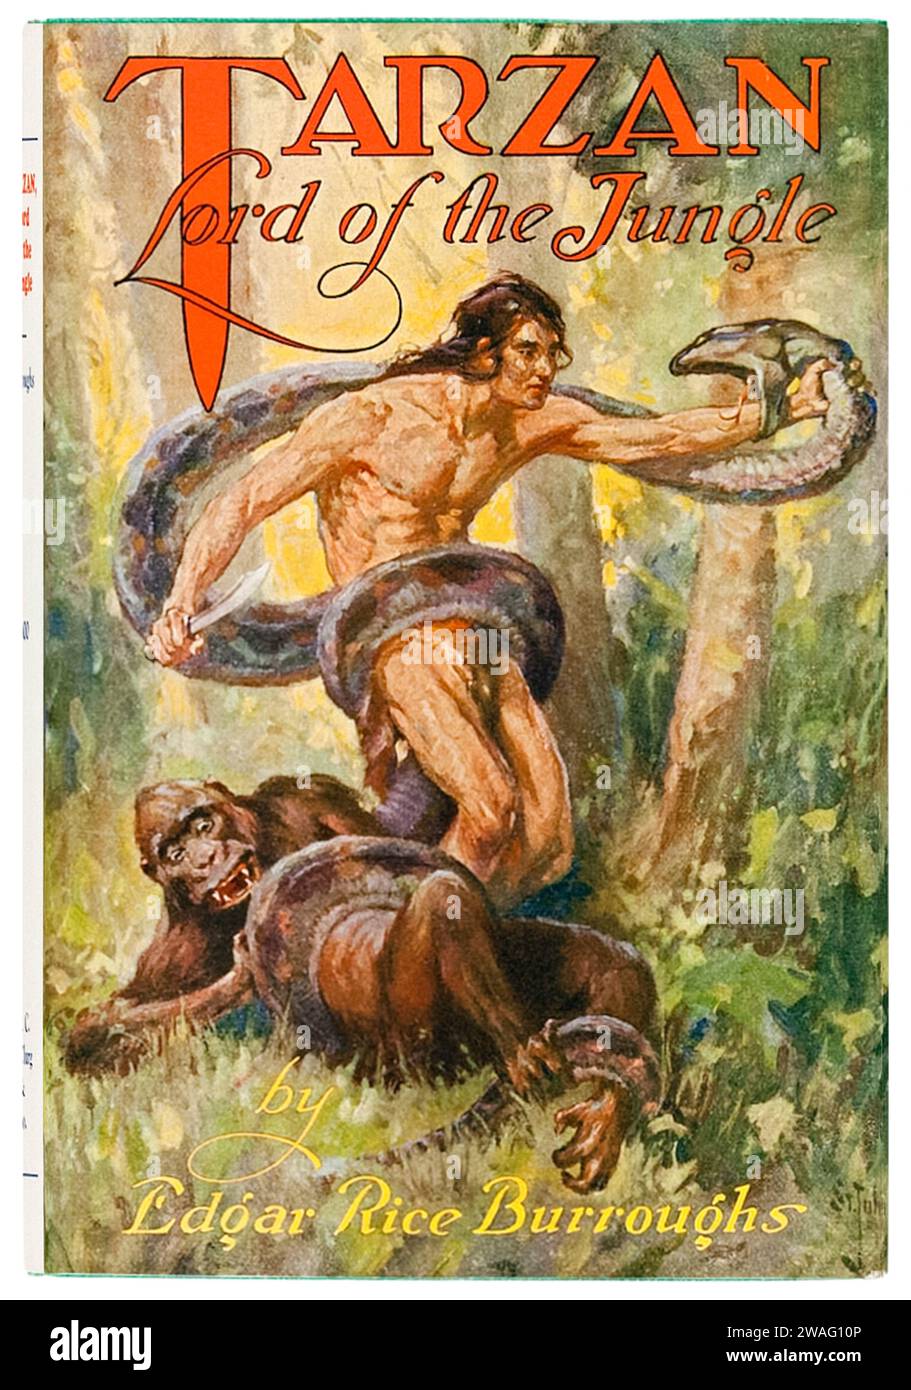 ‘Tarzan Lord of the Jungle’ by Edgar Rice Burroughs (1875-1950). Photograph of 1928 first edition published by A. C. McClurg & Co., Chicago featuring artwork by J. Allen St. John (1872-1957). Credit: Private Collection / AF Fotografie Stock Photo